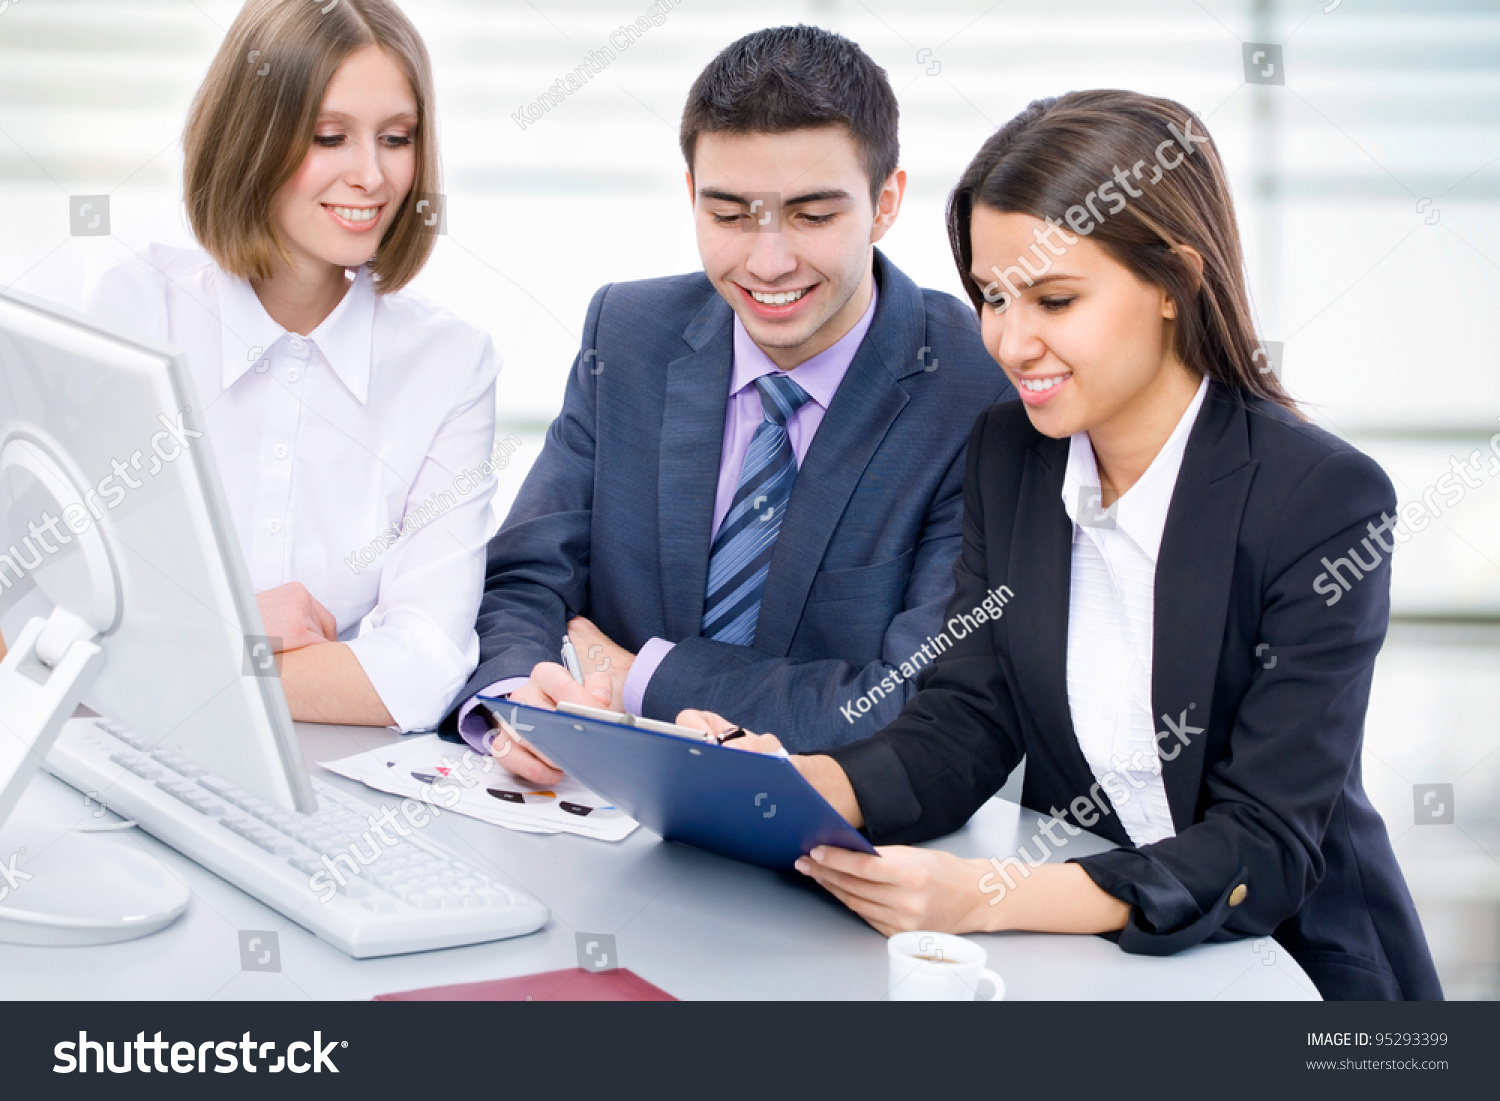 http://image.shutterstock.com/z/stock-photo-business-people-analyzing-and-discussing-during-a-working-meeting-in-a-modern-office-95293399.jpg